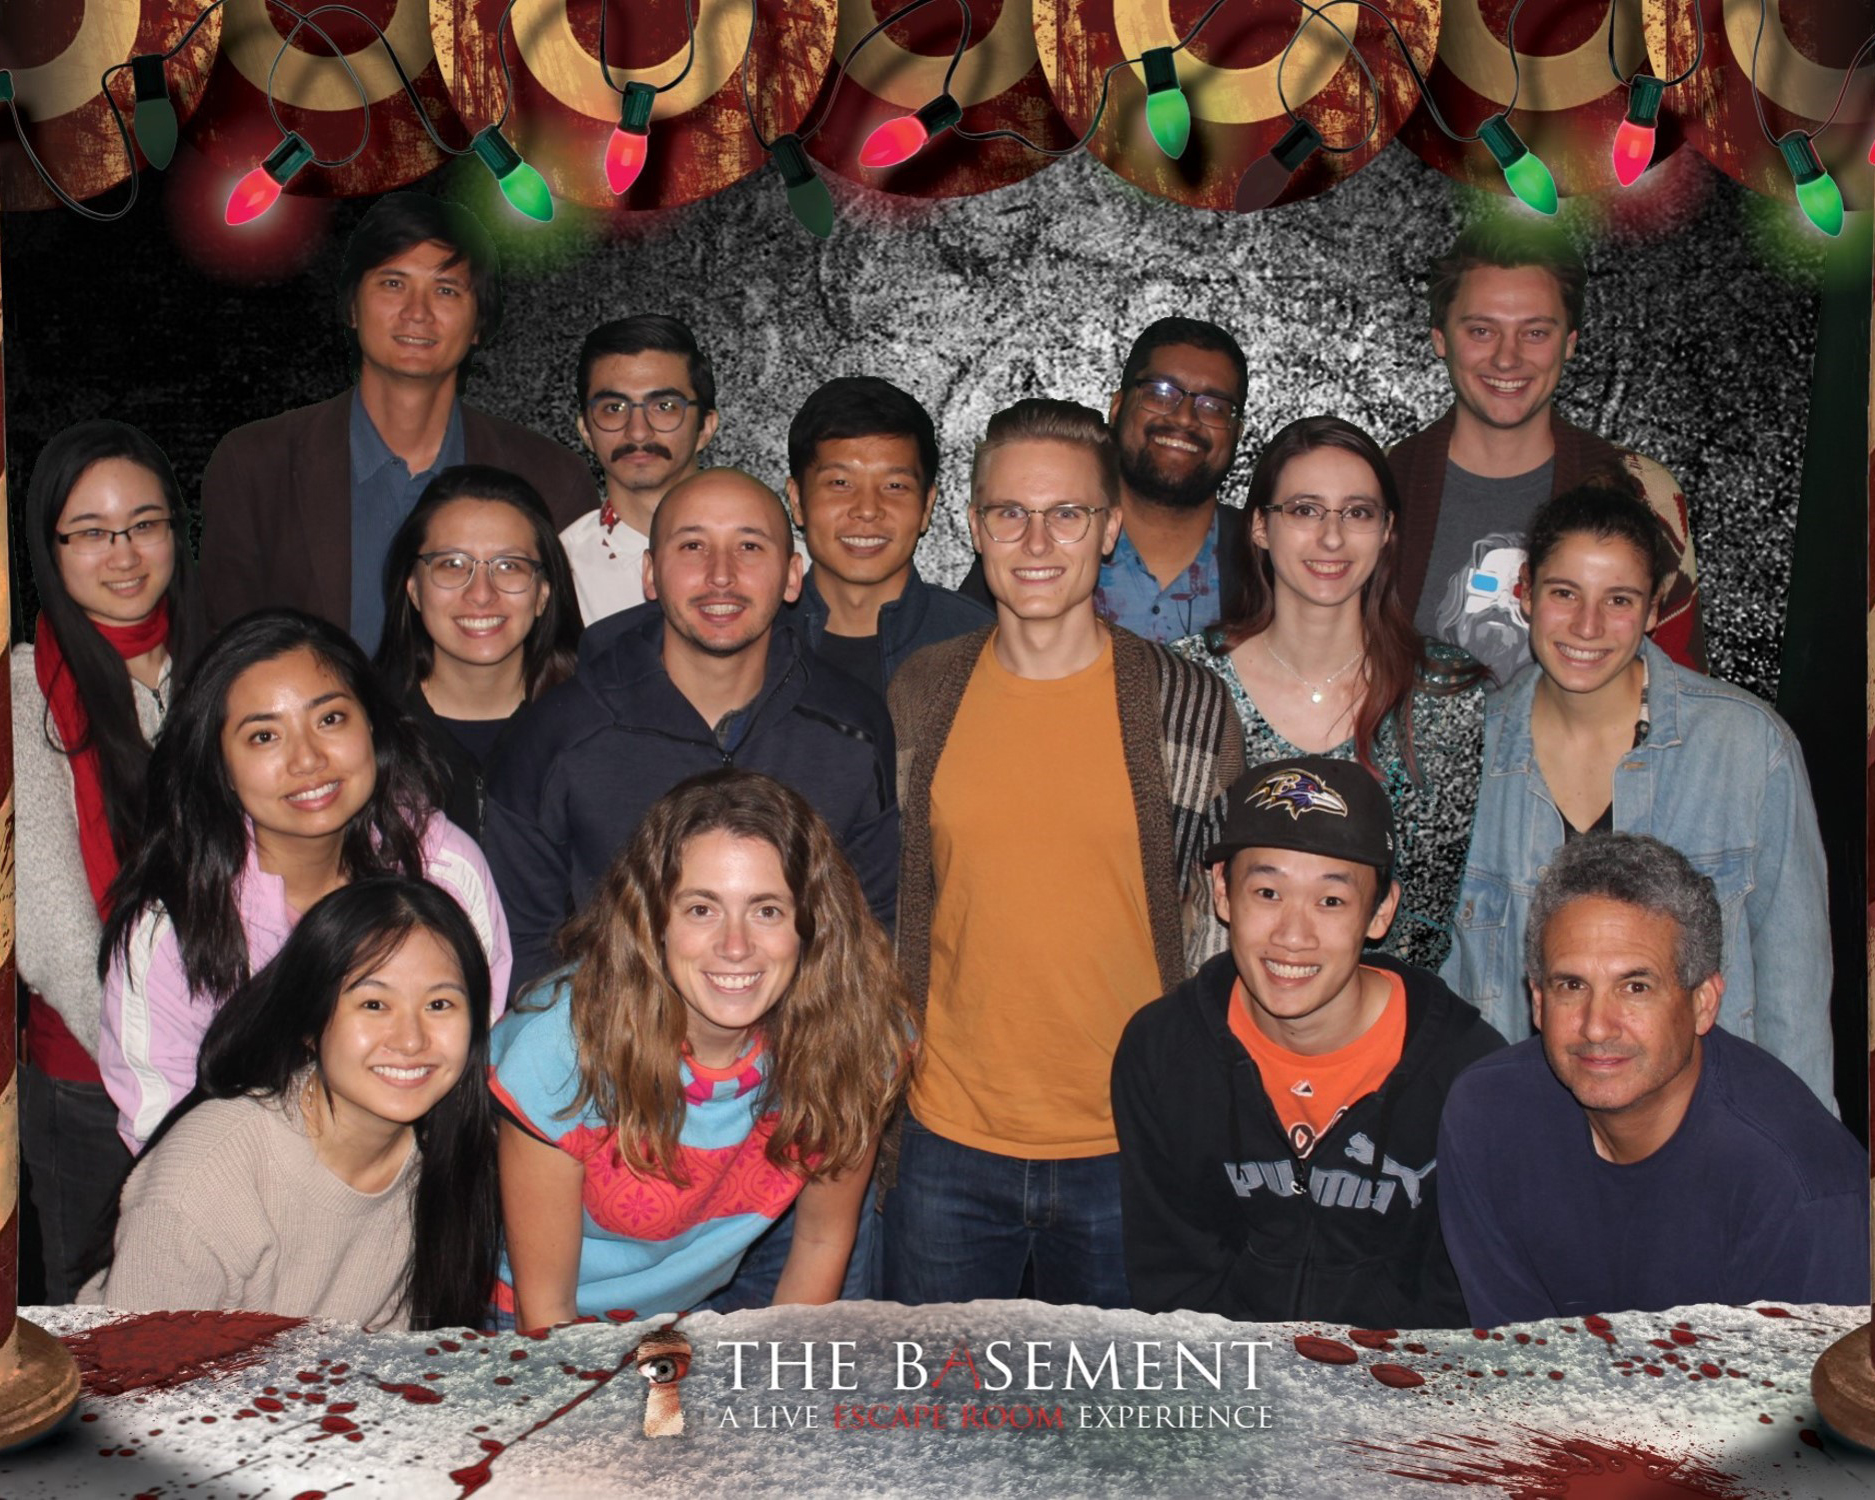 Teitell Lab Holiday Escape Room